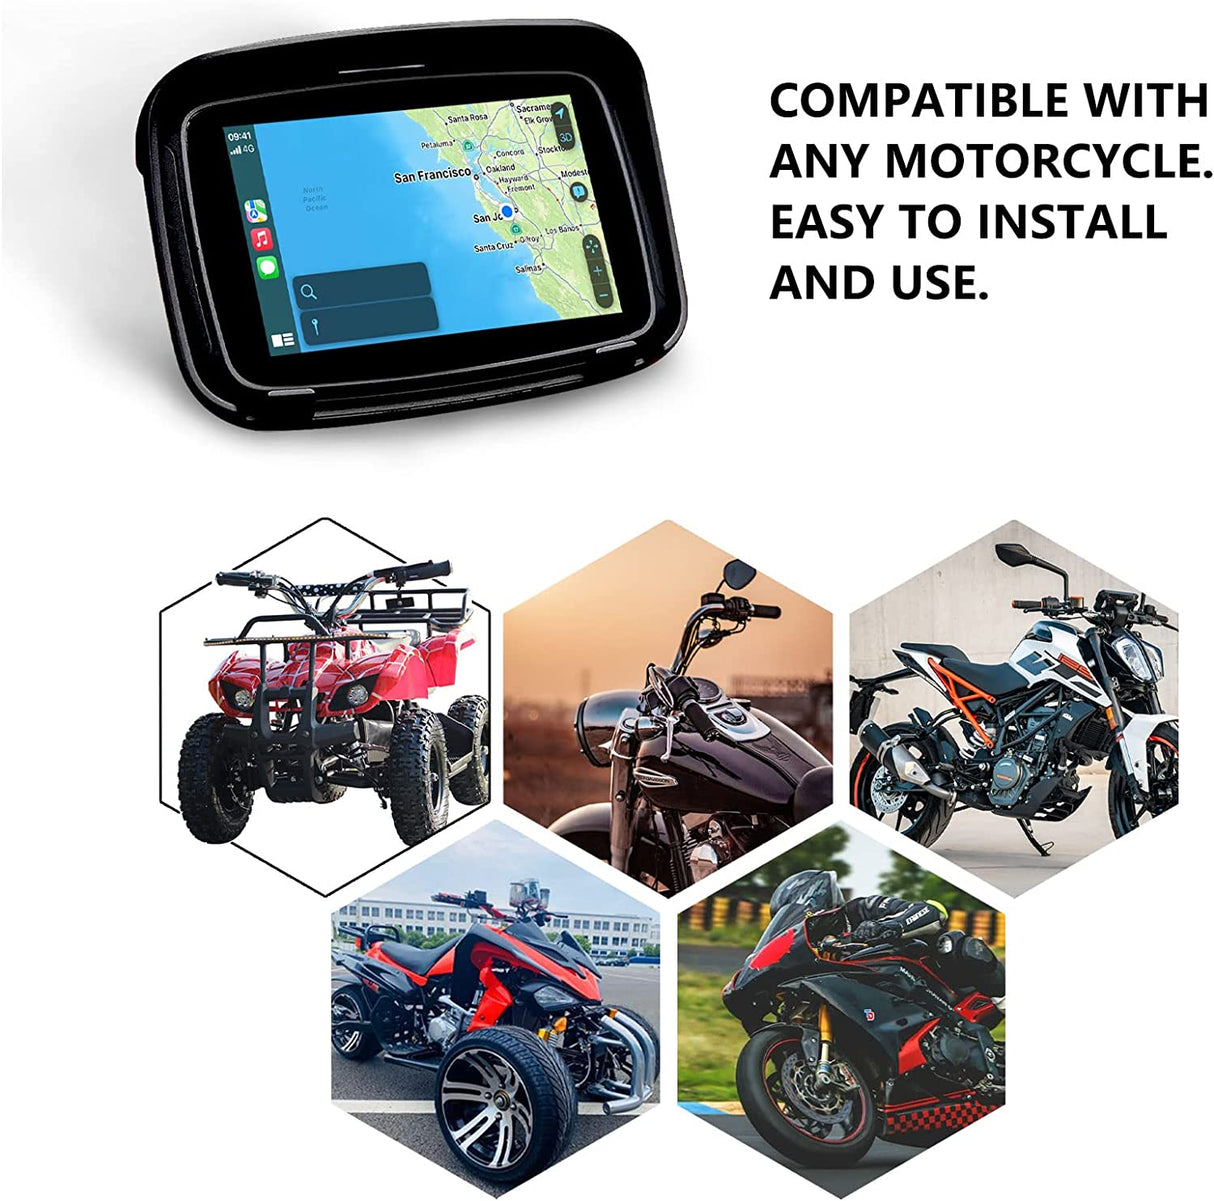 Portable Wireless Carplay & Android Auto for Motorcycle Navigator 5 IPS  Touch Screen Waterproof Car Monitor for Motor Bike, Built-in Speaker Voice